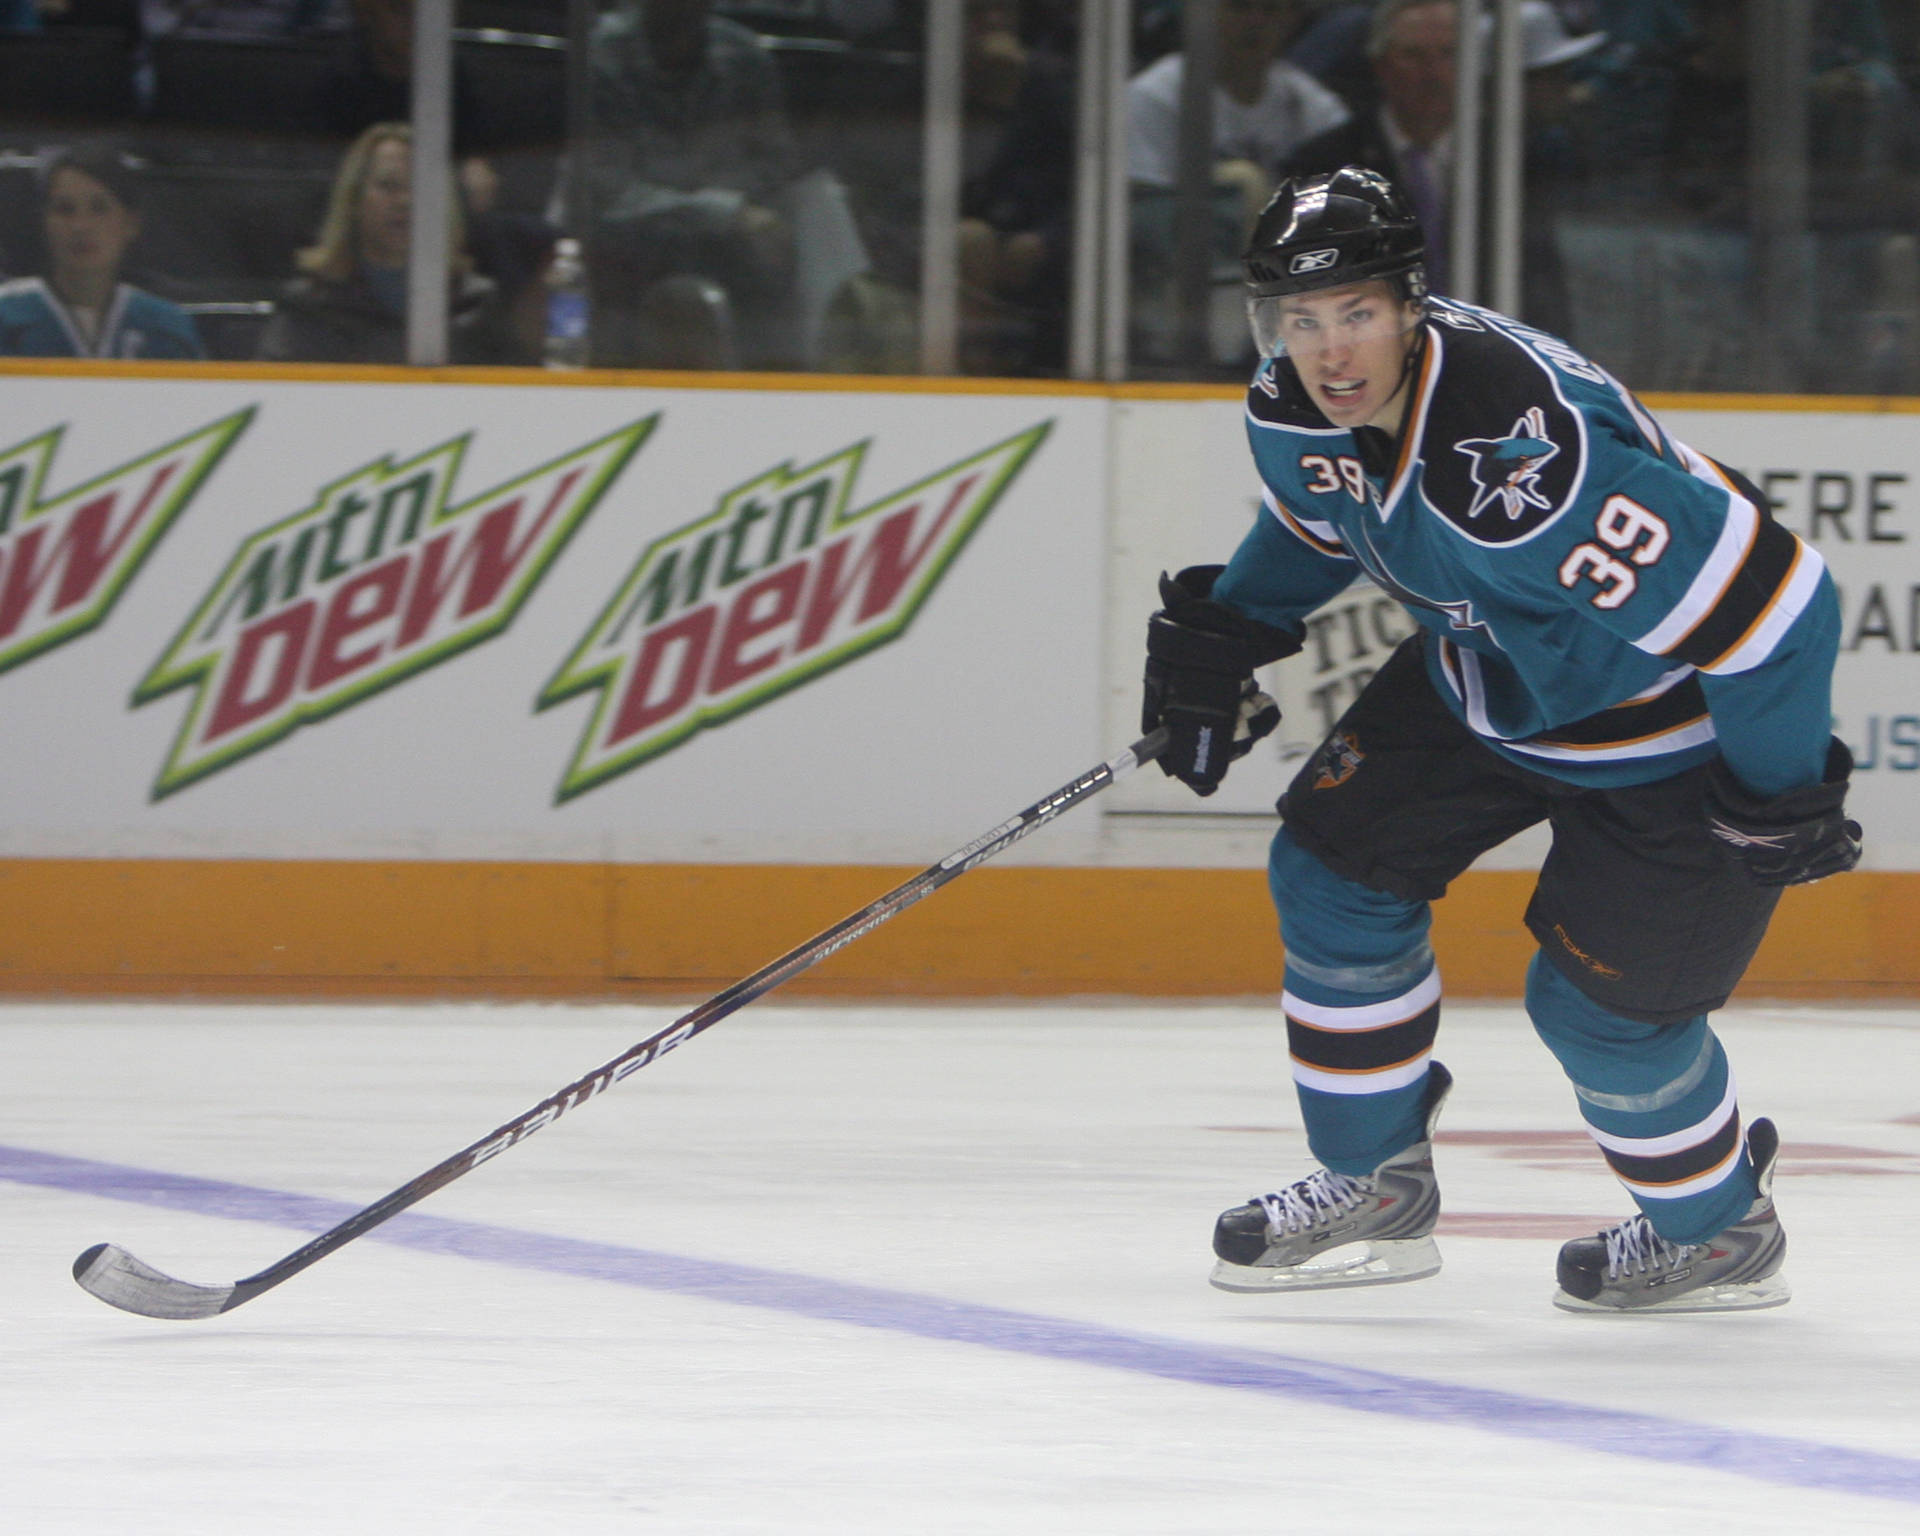 Canadian Professional Ice Hockey Center Logan Couture On Rink Background